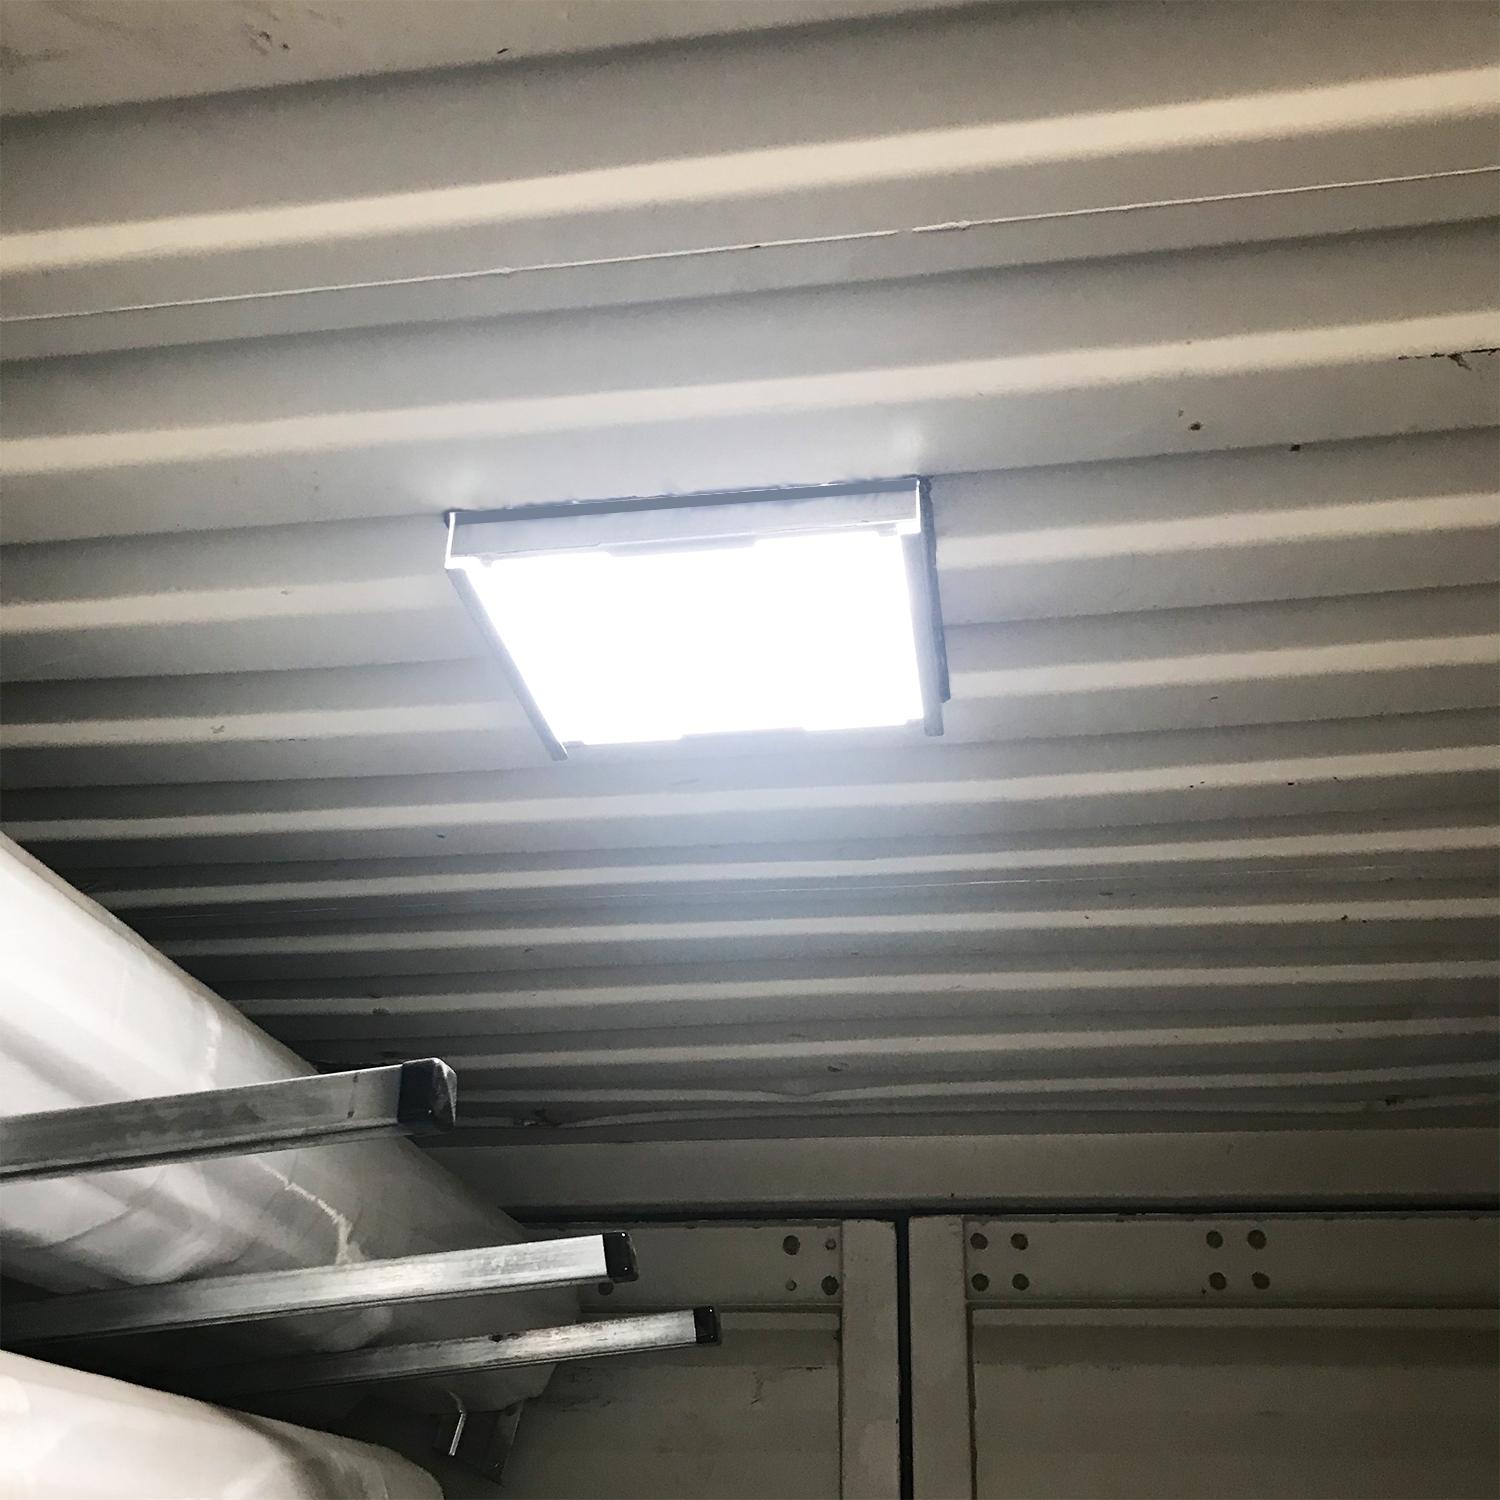 BigAir Sky Light Roof Vent for Preventing Condensation and Excessive Heat in New and Used Sea Cans, Shipping Container Homes, Cabins and Offices